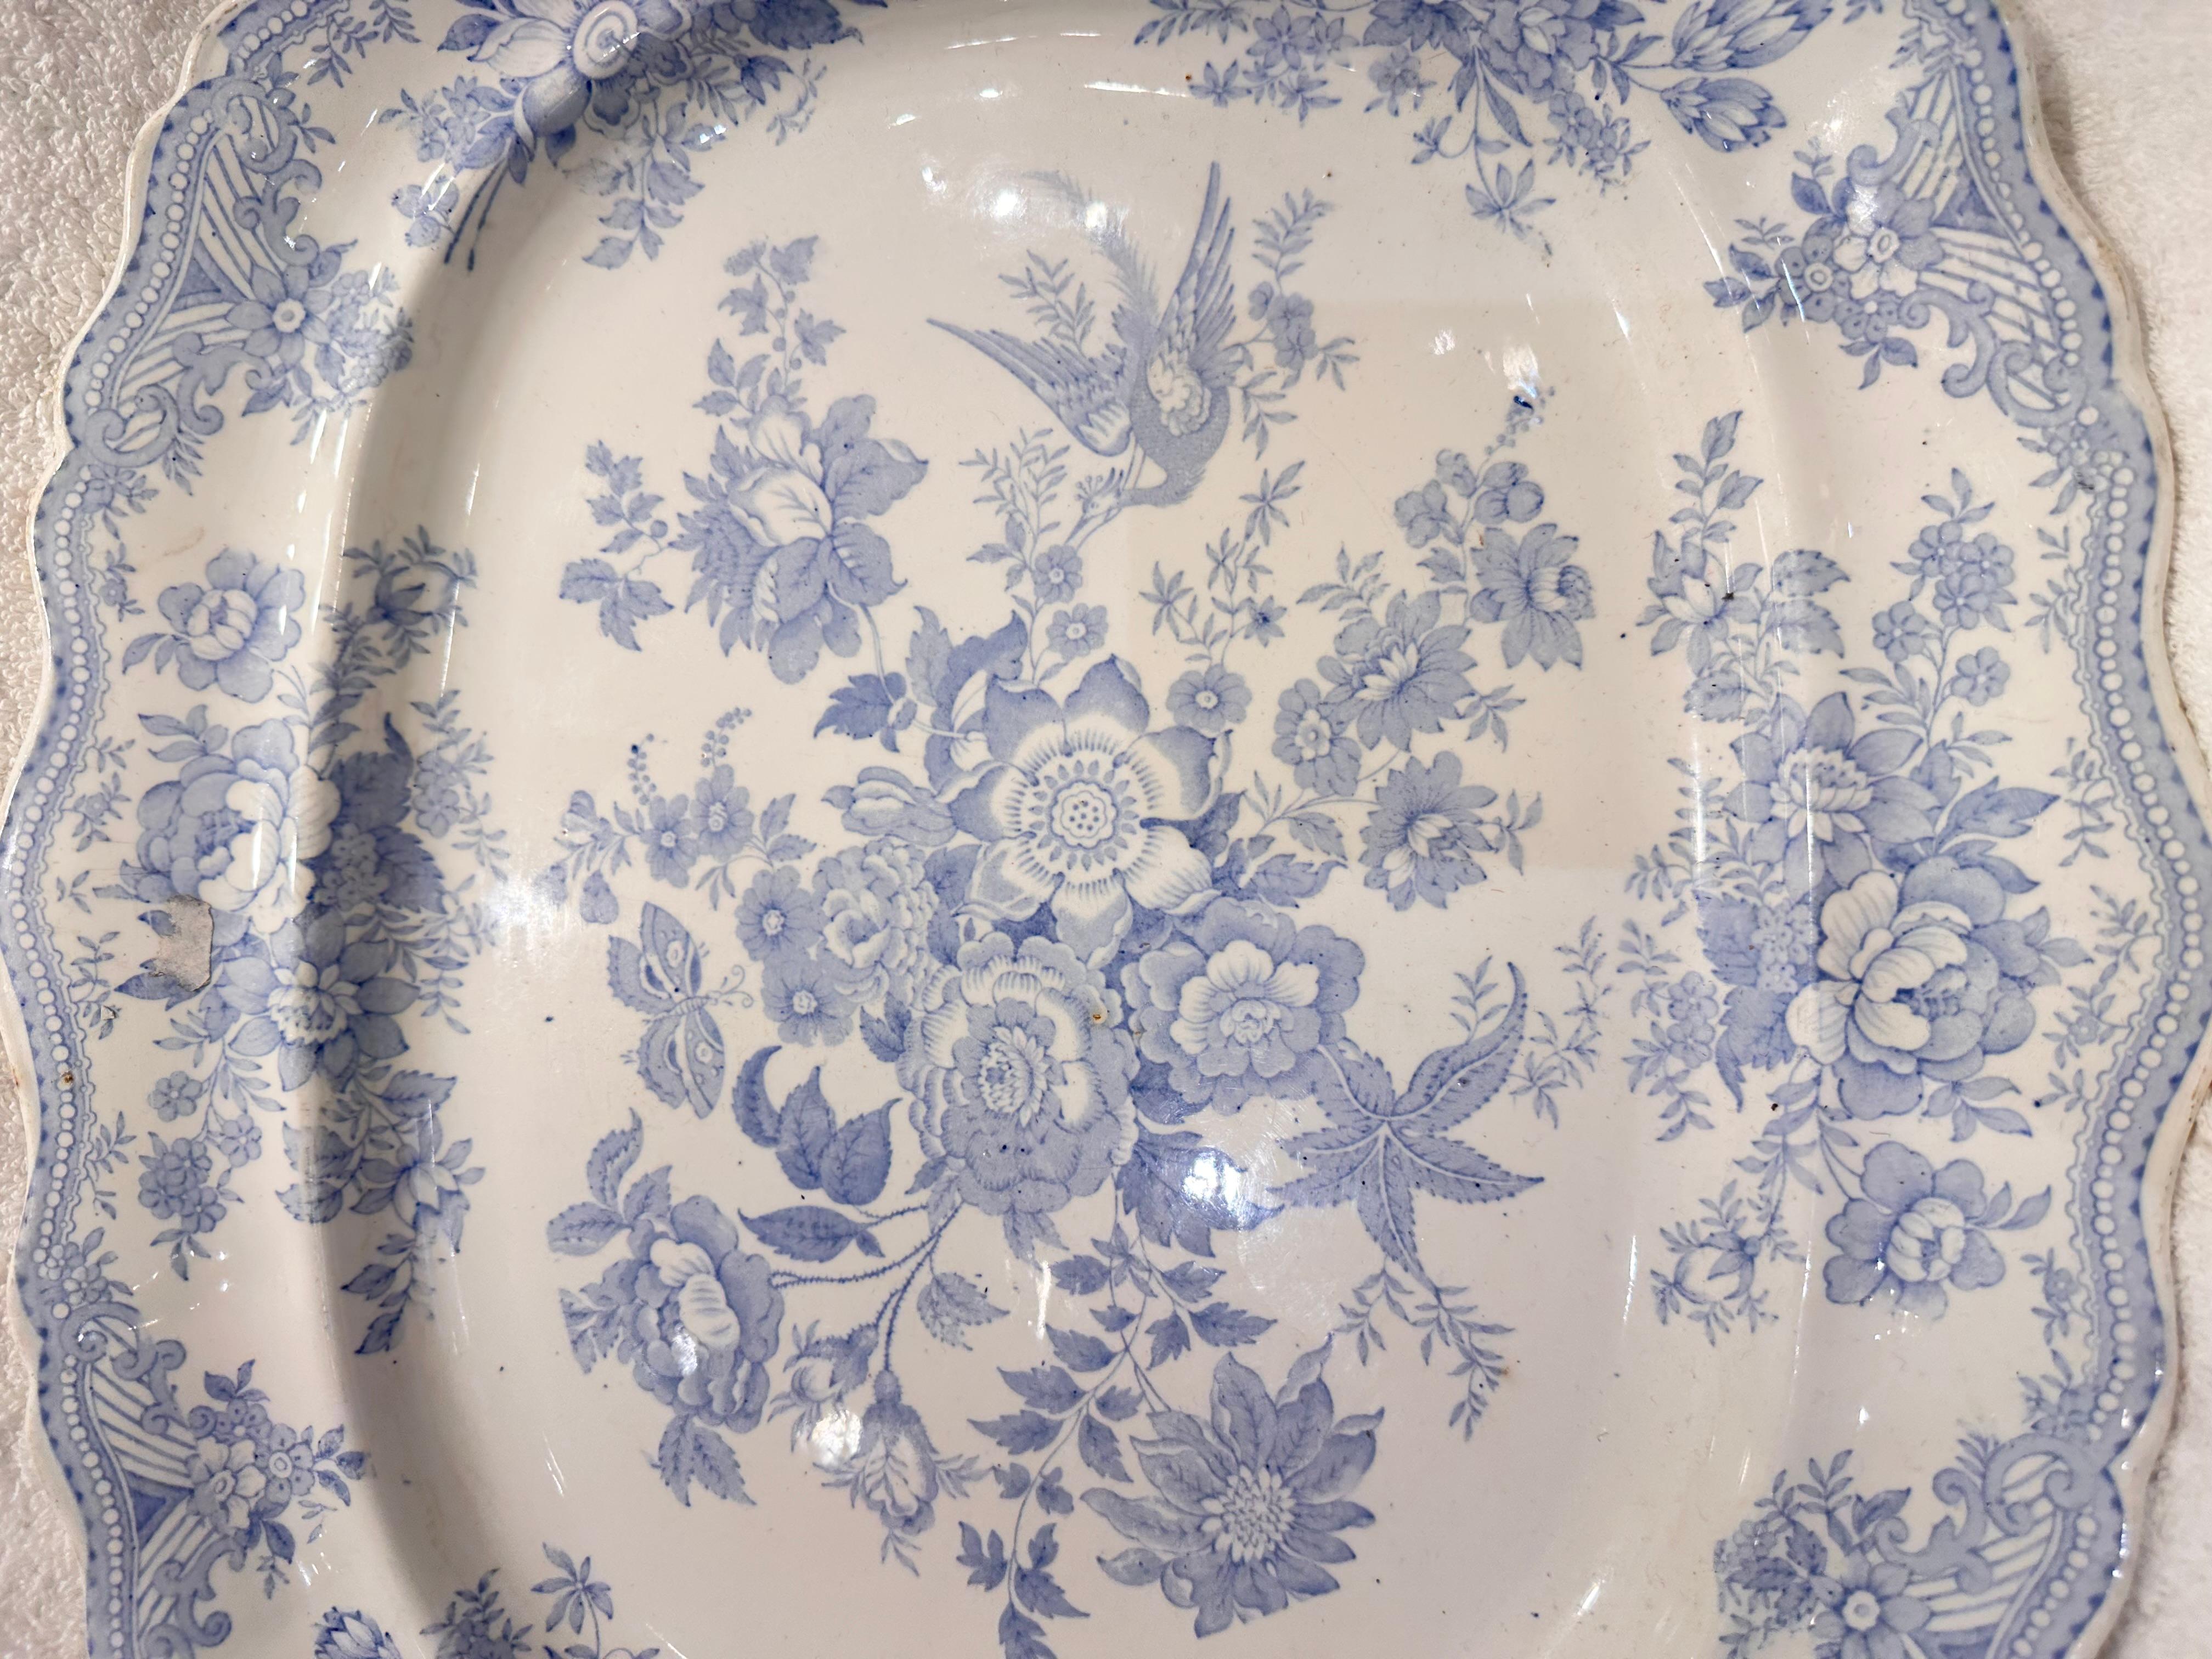 This very soft blue and white platter is the perfect way to add some color to your space! Whether that be on a table top as a serving piece, or hanging on a wall display this platter will shine. This piece is in excellent condition with minimal